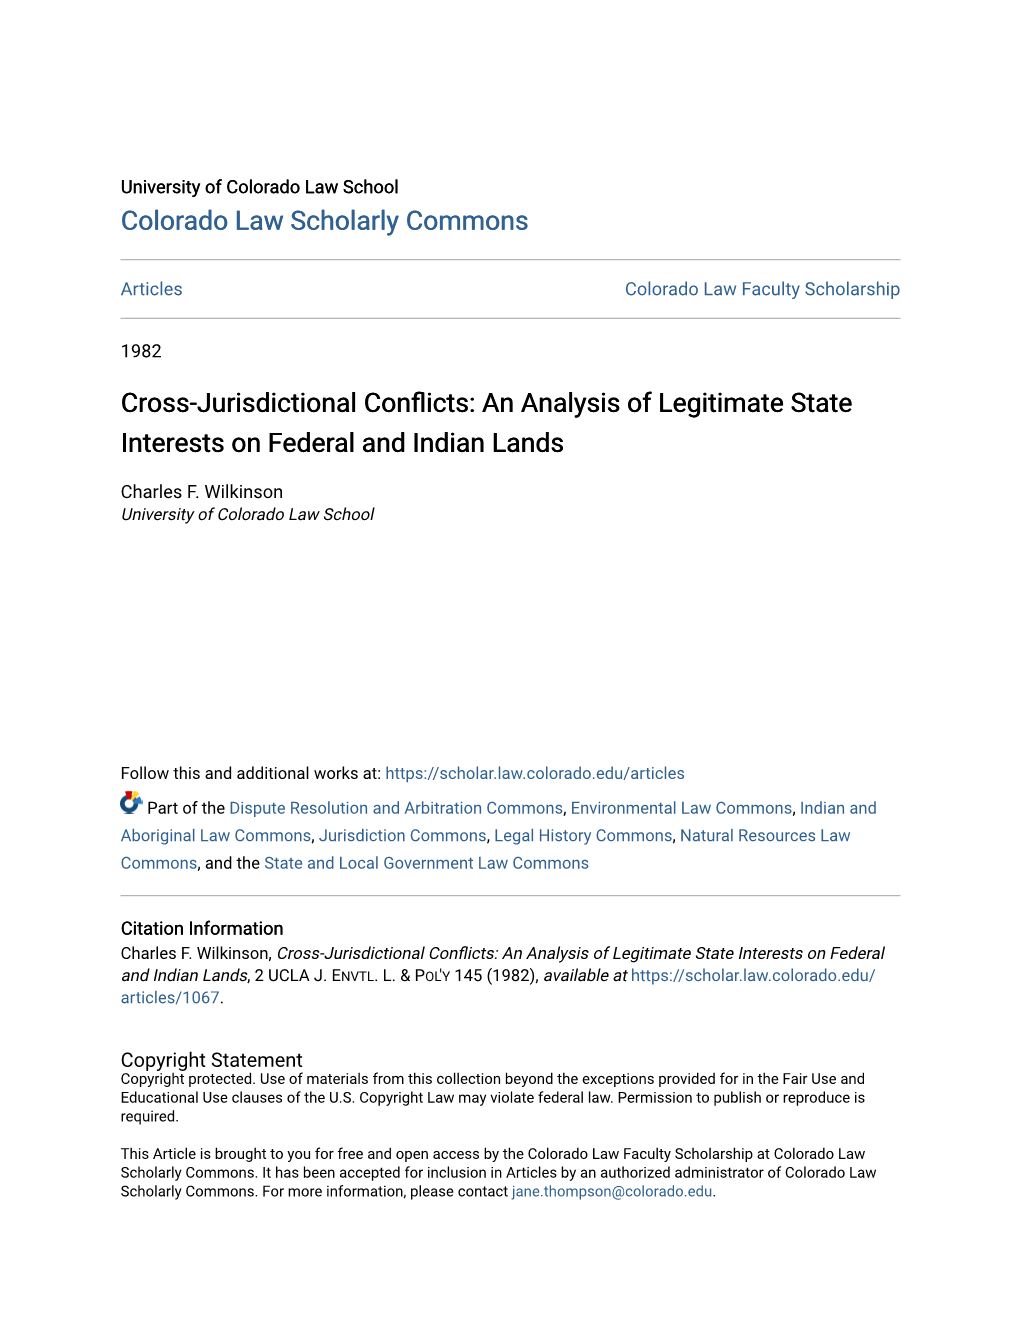 An Analysis of Legitimate State Interests on Federal and Indian Lands